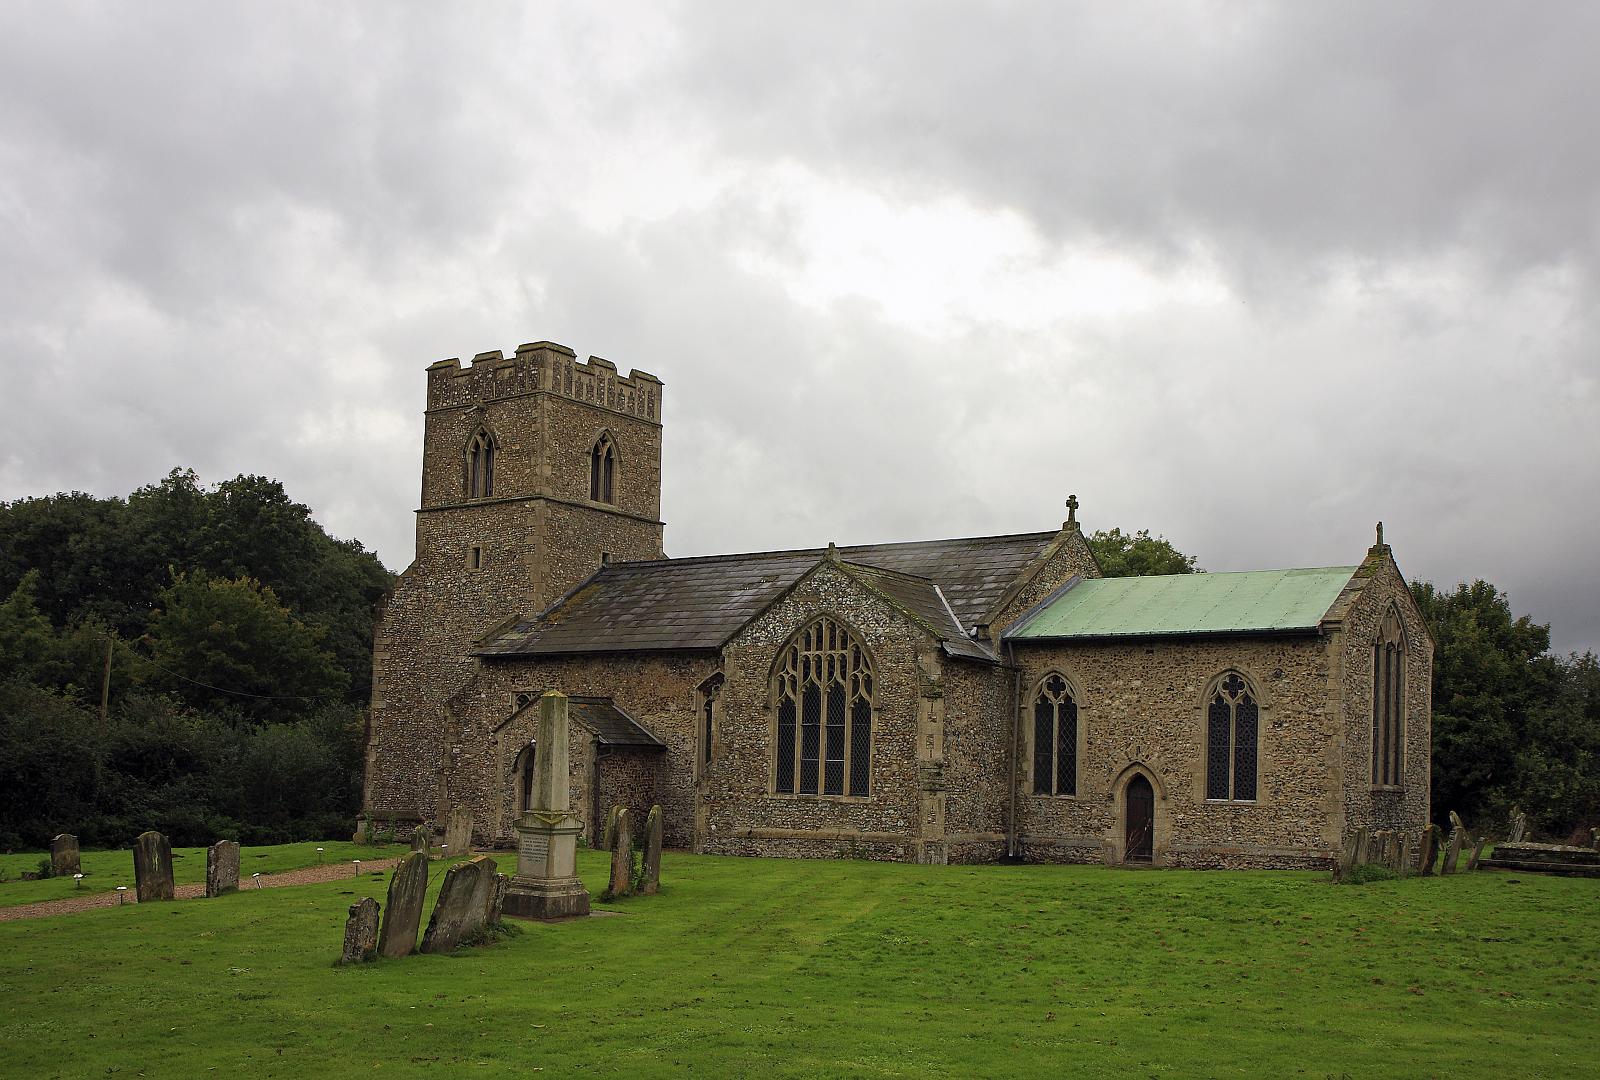 an old church with a tall green roof sitting on the grass